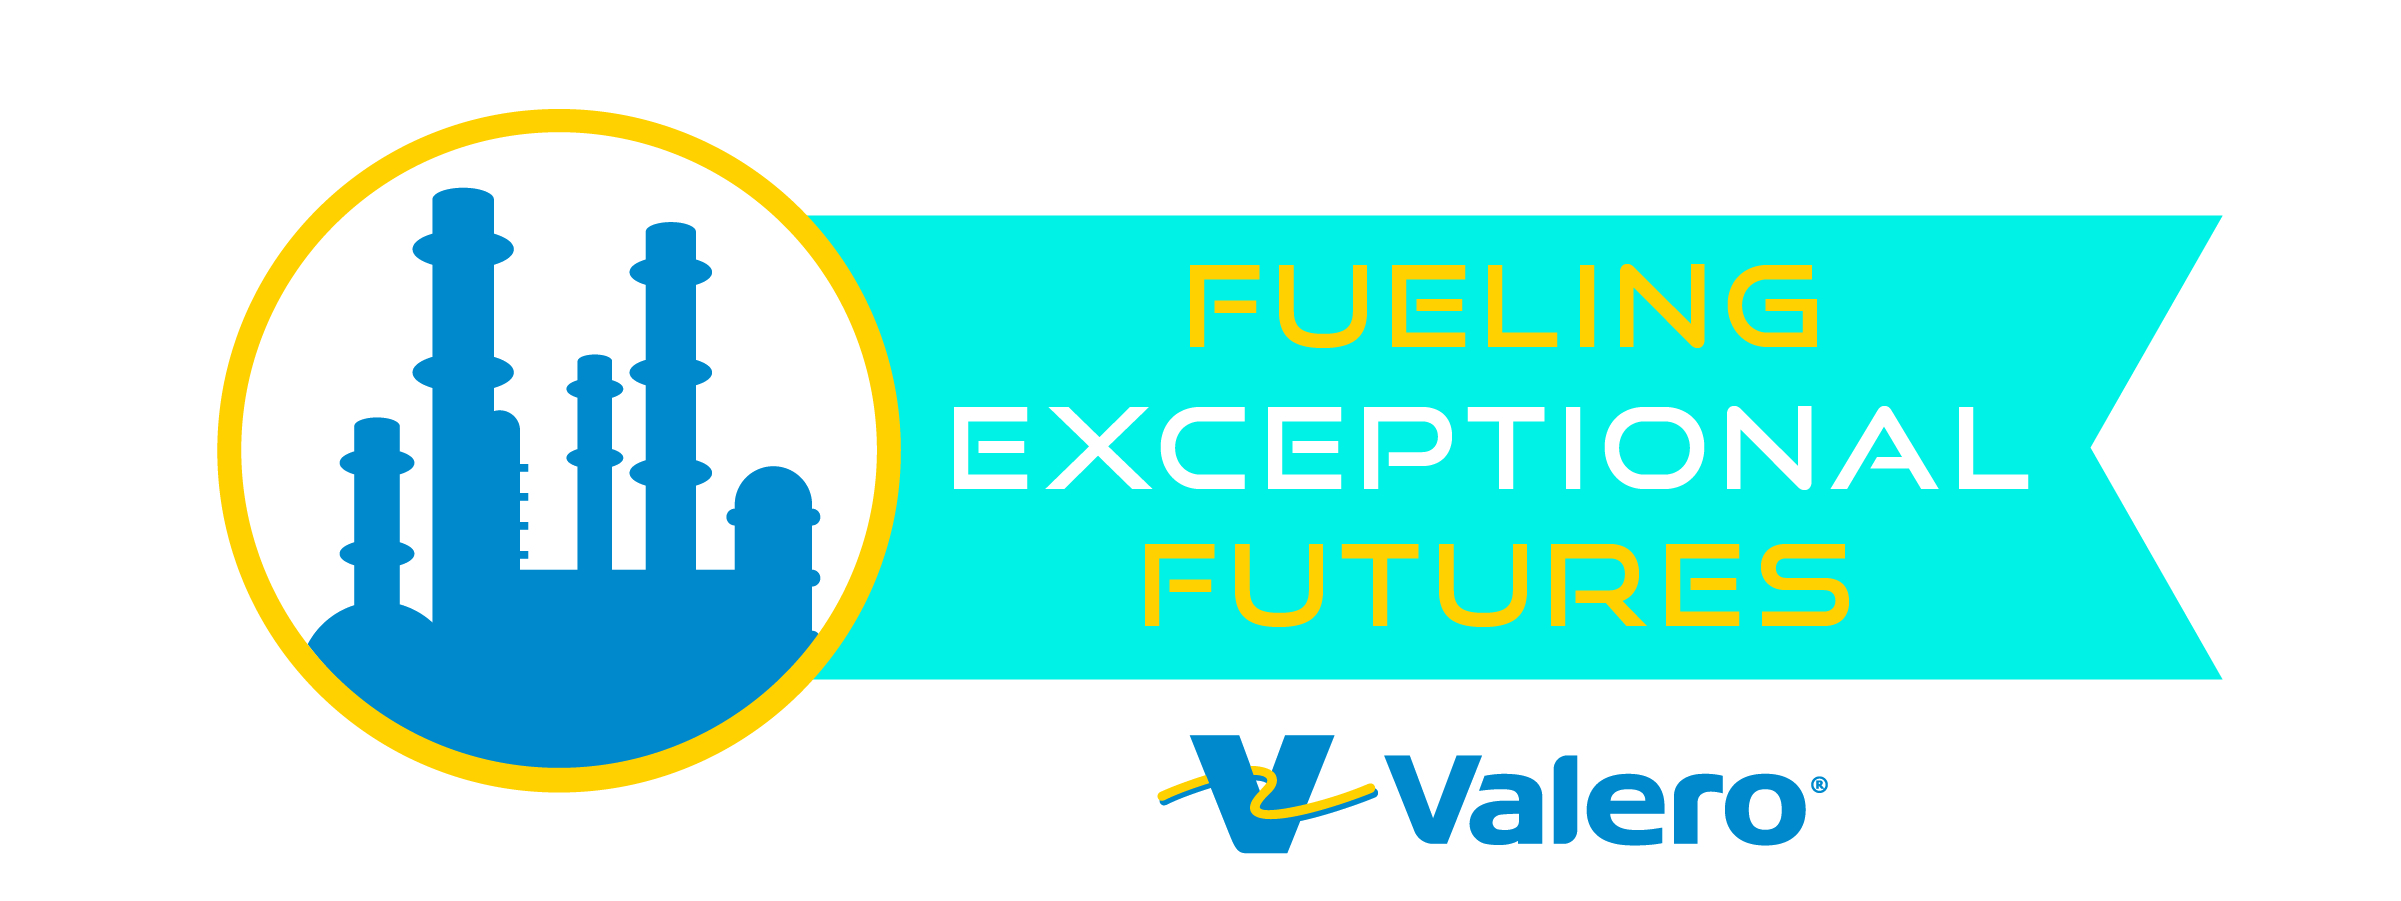 Fueling Exceptional Futures logo